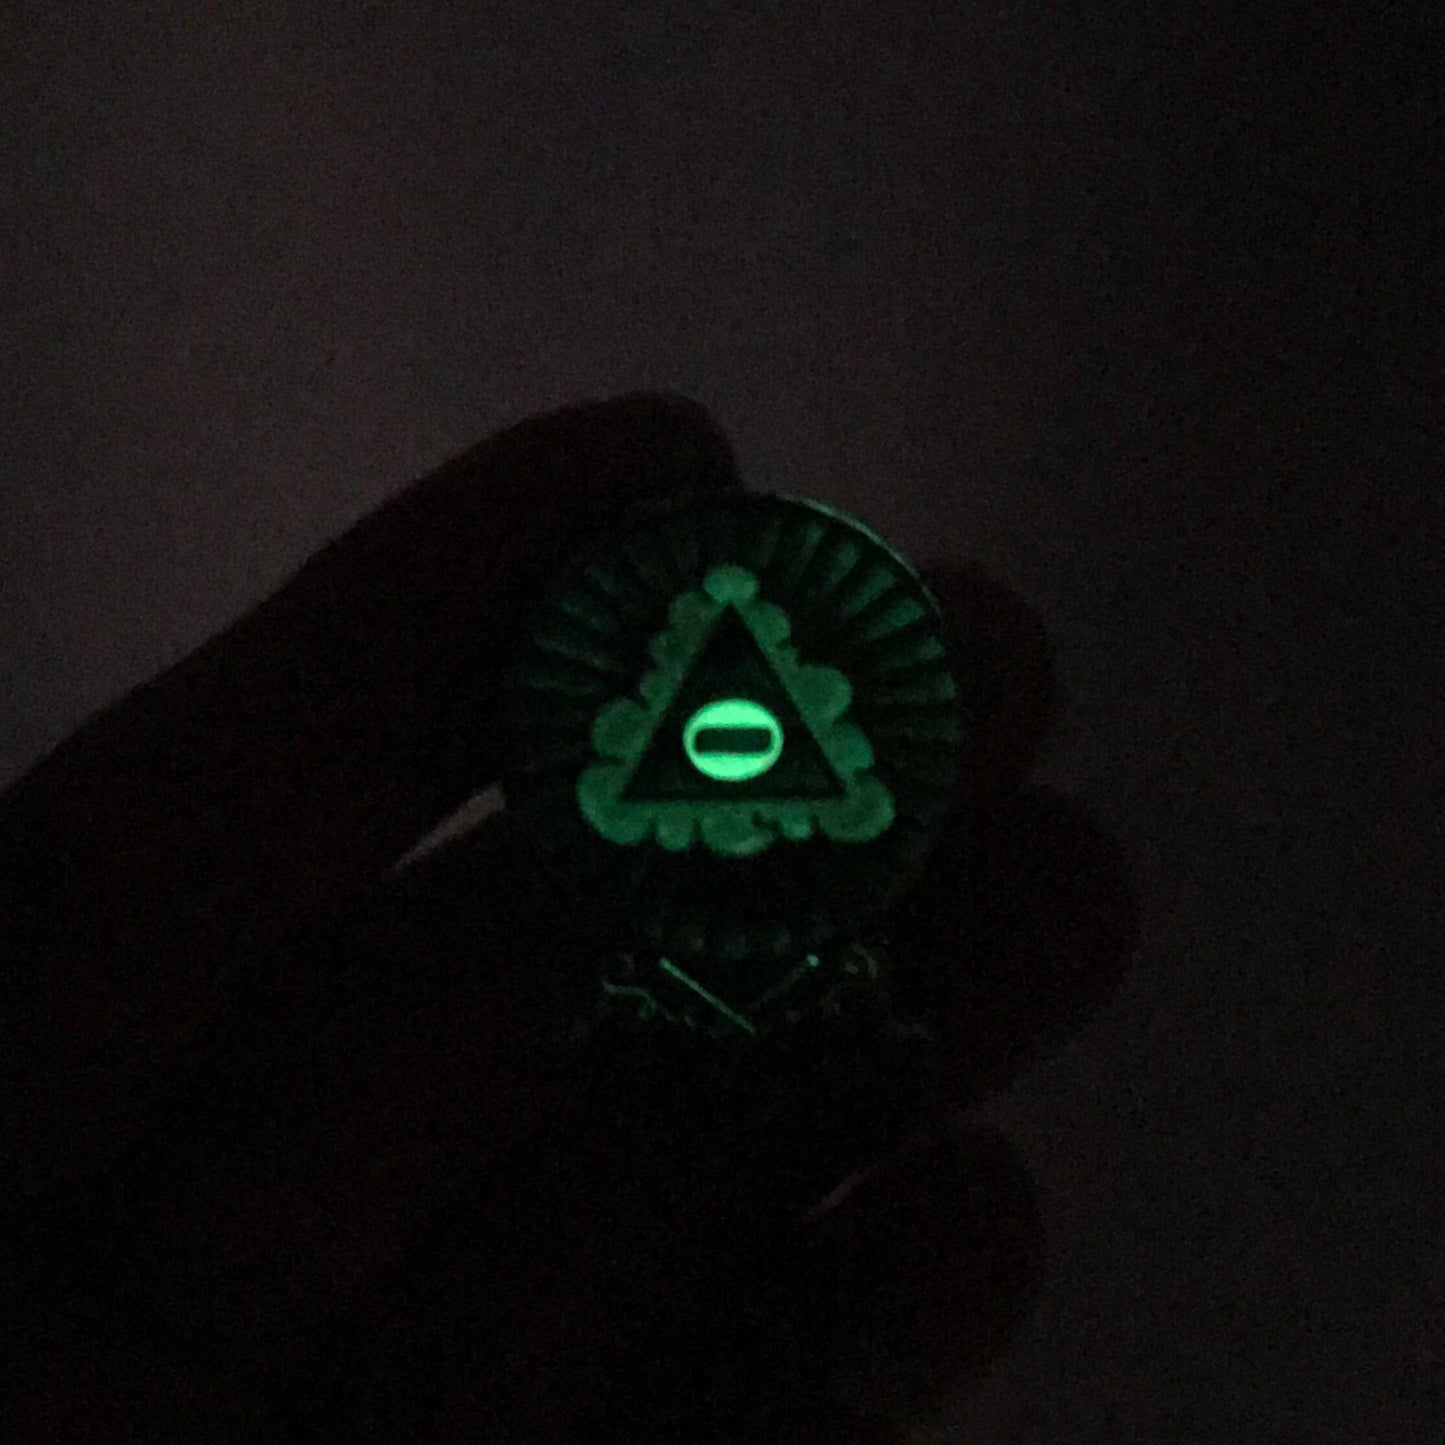 Glowing Crystal Ball Enamel Pin (The Knitter's Oracle)